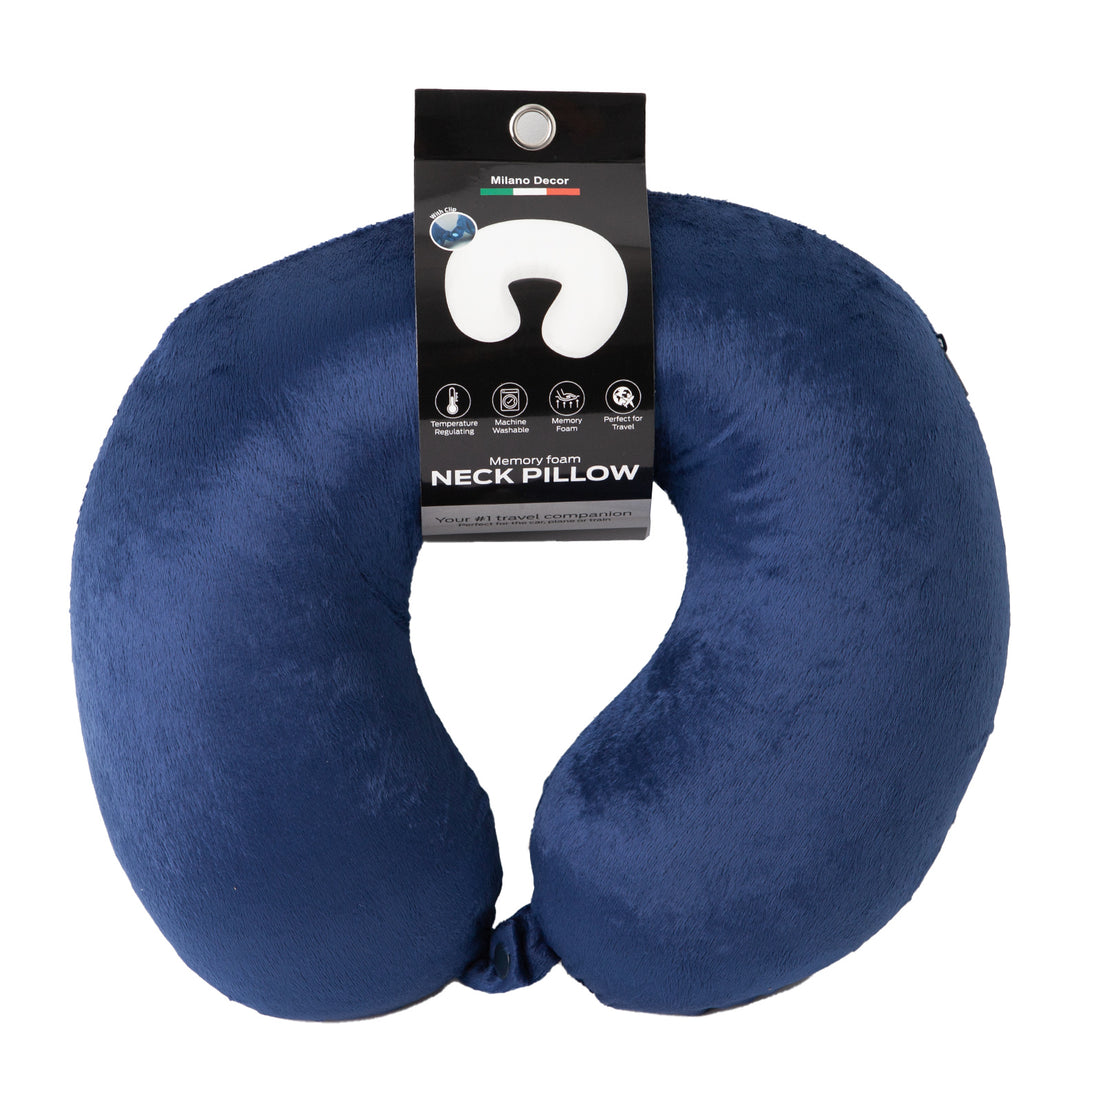 Milano Decor Memory Foam Travel Neck Pillow With Clip Cushion Support Soft-Travel Accessories-PEROZ Accessories